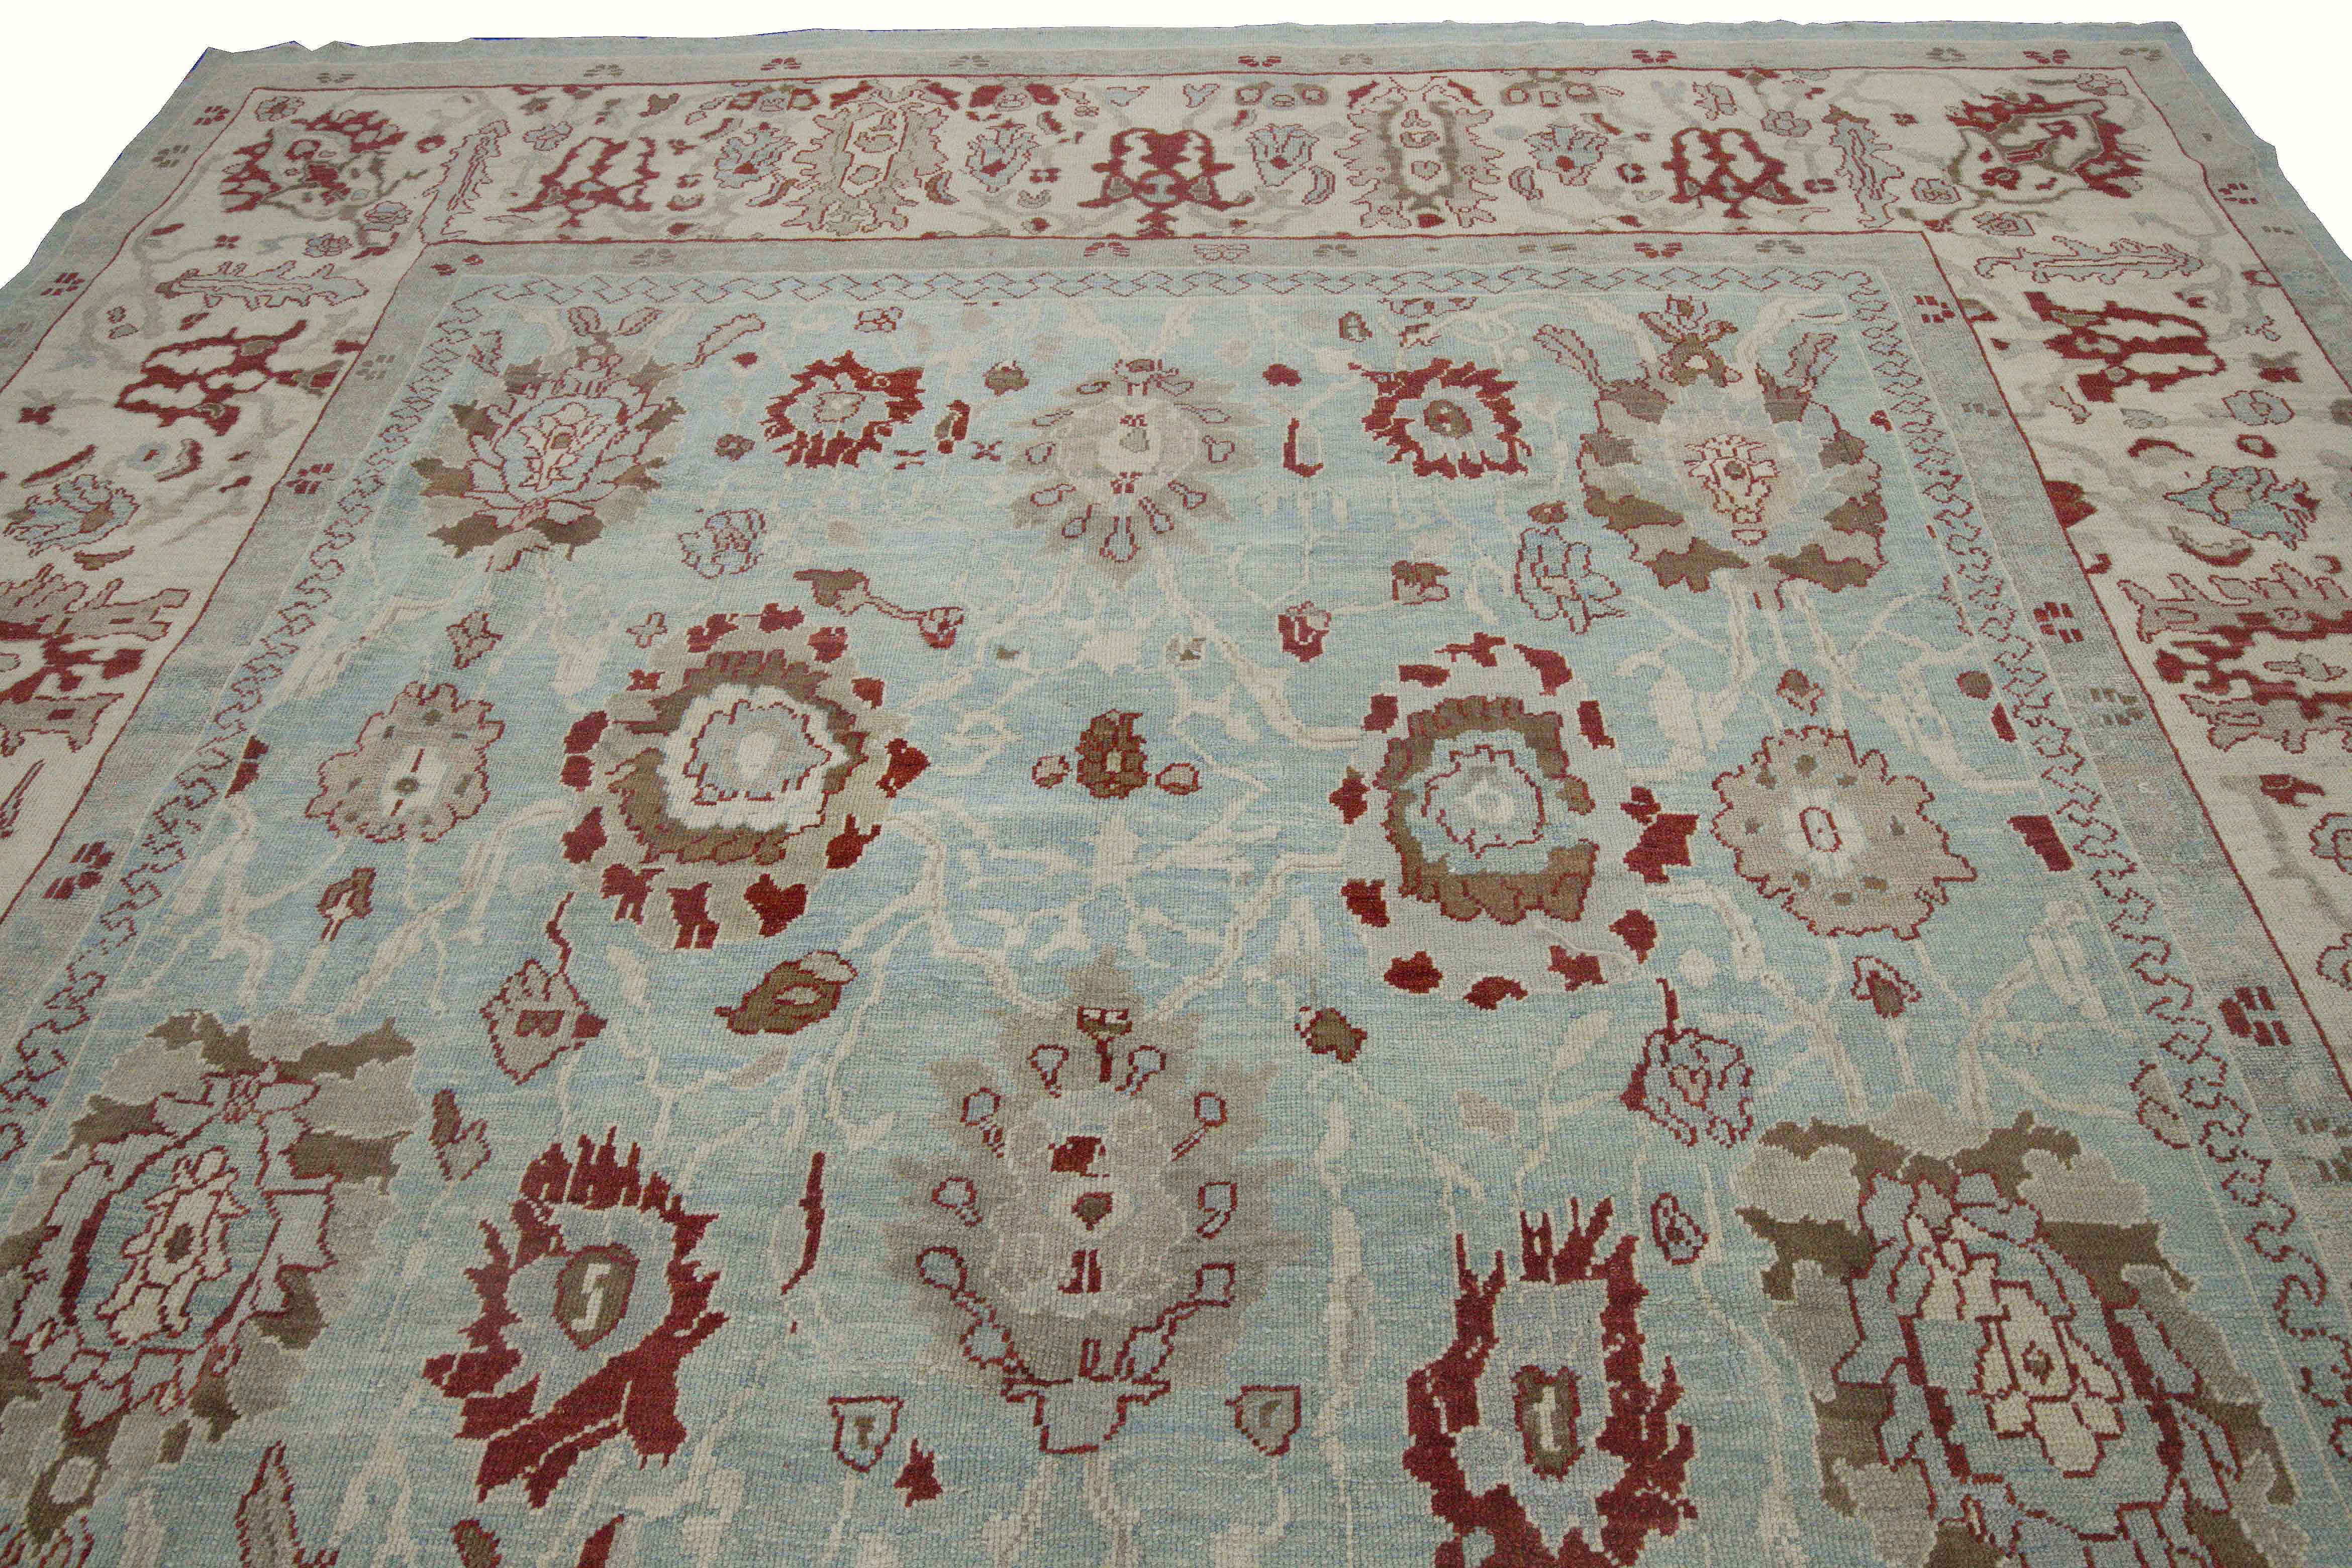 Modern Turkish rug made of handwoven sheep’s wool of the finest quality. It’s colored with organic vegetable dyes that are certified safe for humans and pets alike. It features a combination blue and ivory field with unique flower head details in